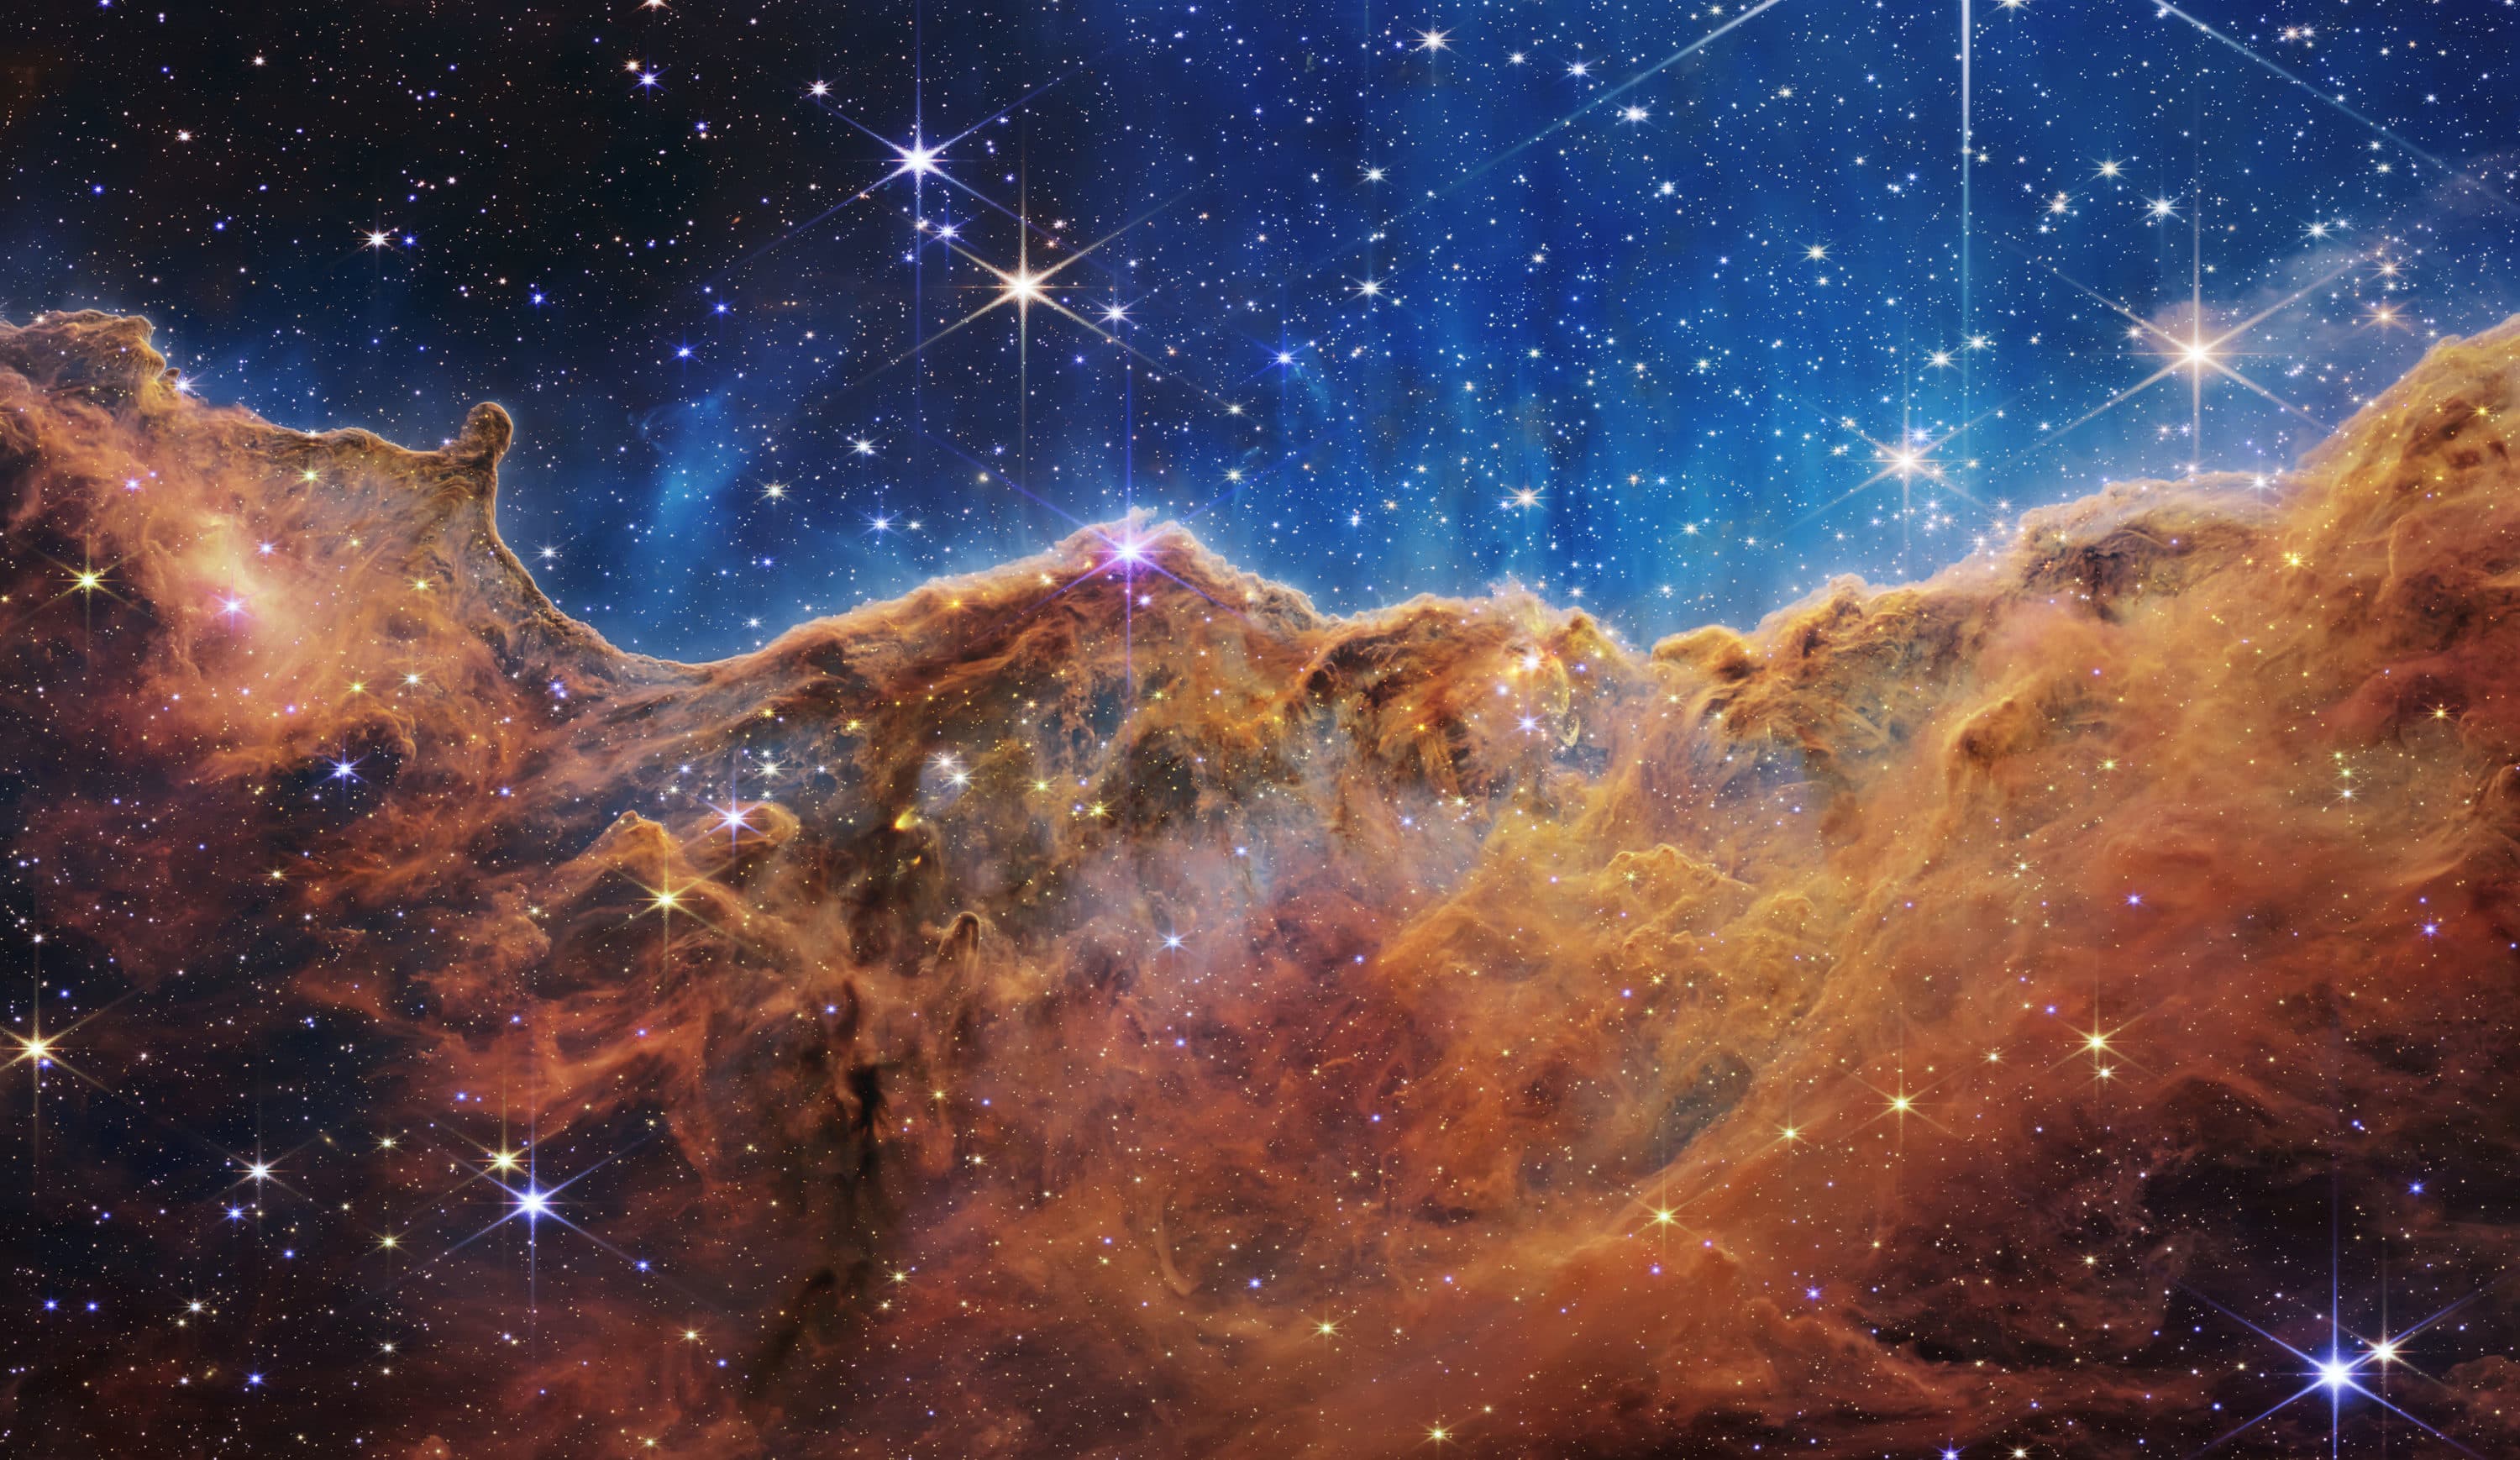 A landscape of mountains and valleys speckled with glittering stars is actually the edge of a nearby, young, star-forming region called NGC 3324 in the Carina Nebula, on July 12, 2022 captured by NASA's new James Webb Space Telescope. (NASA, ESA, CSA, and STScI via Getty Images)